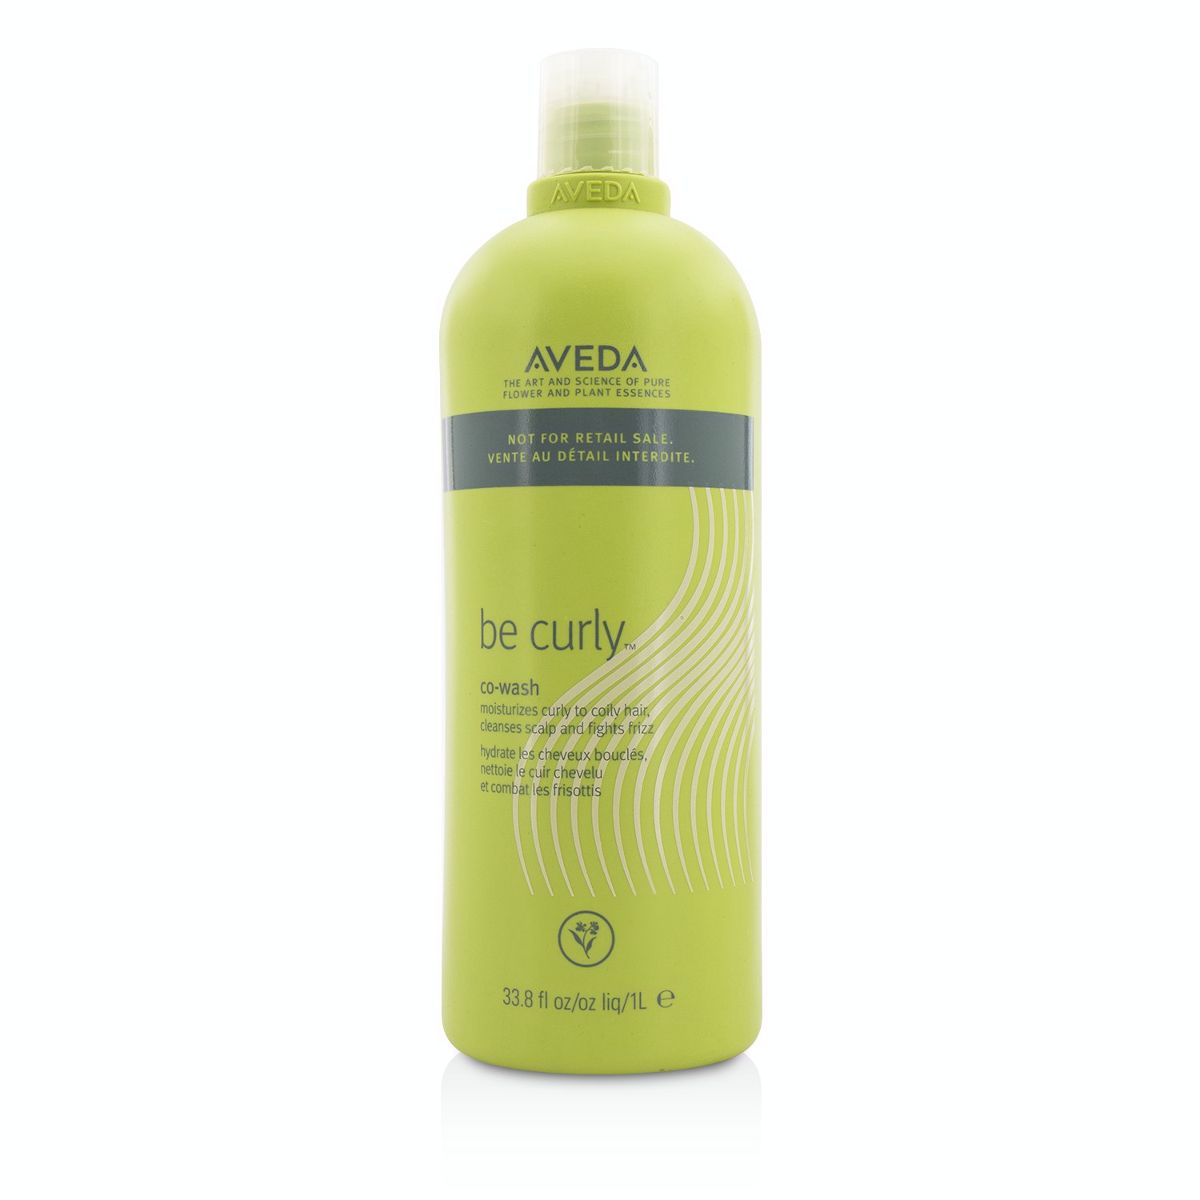 Be Curly Co-Wash (Salon Product) Aveda Image